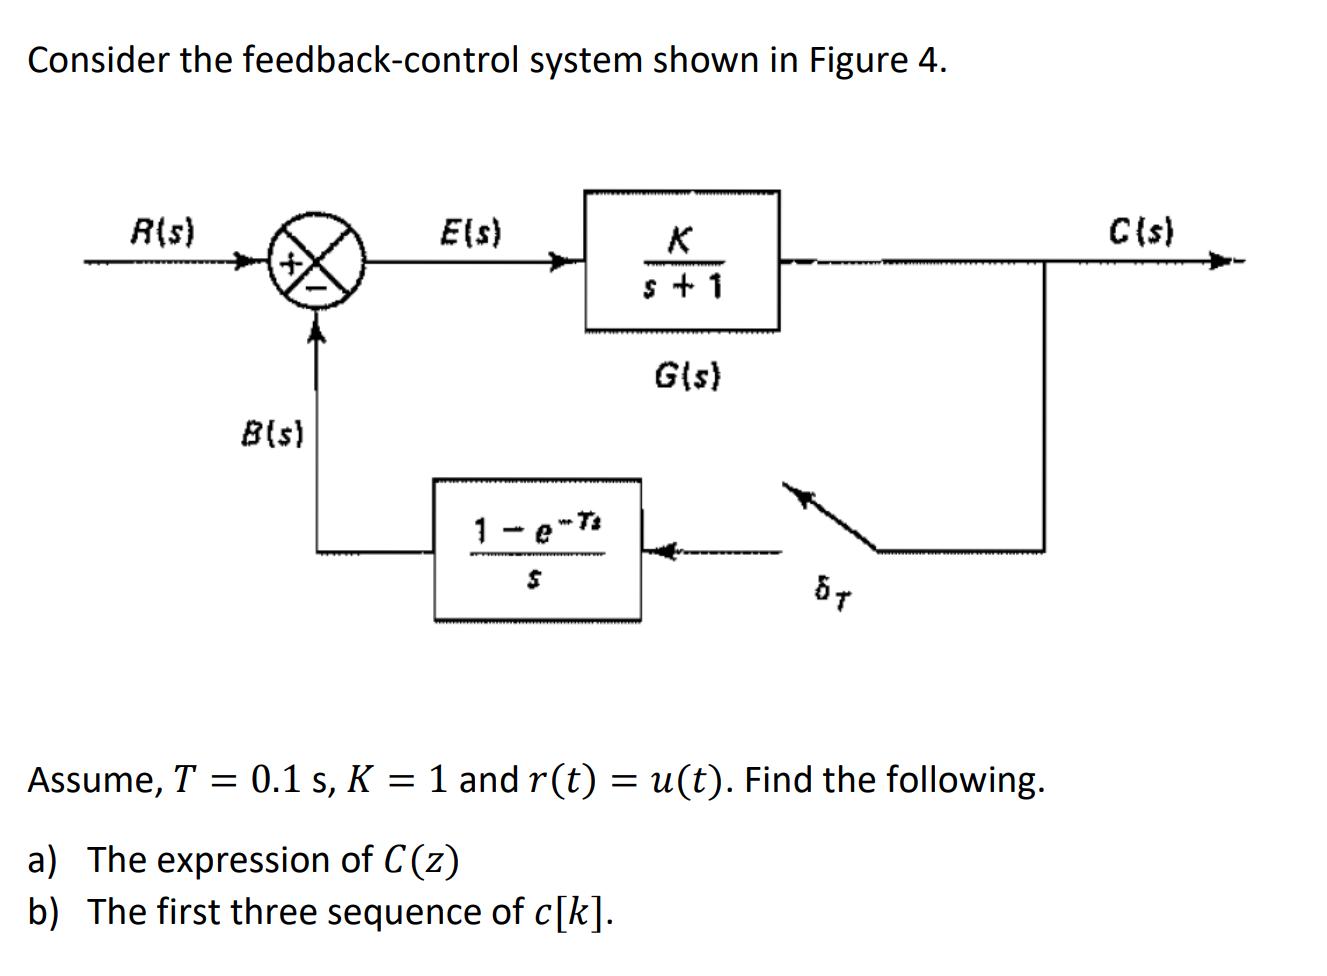 Consider the feedback-control system shown in Figure 4. R(s) B(s) E(s) 1-e7 $ K s+1 G(s) ST Assume, T = 0.1